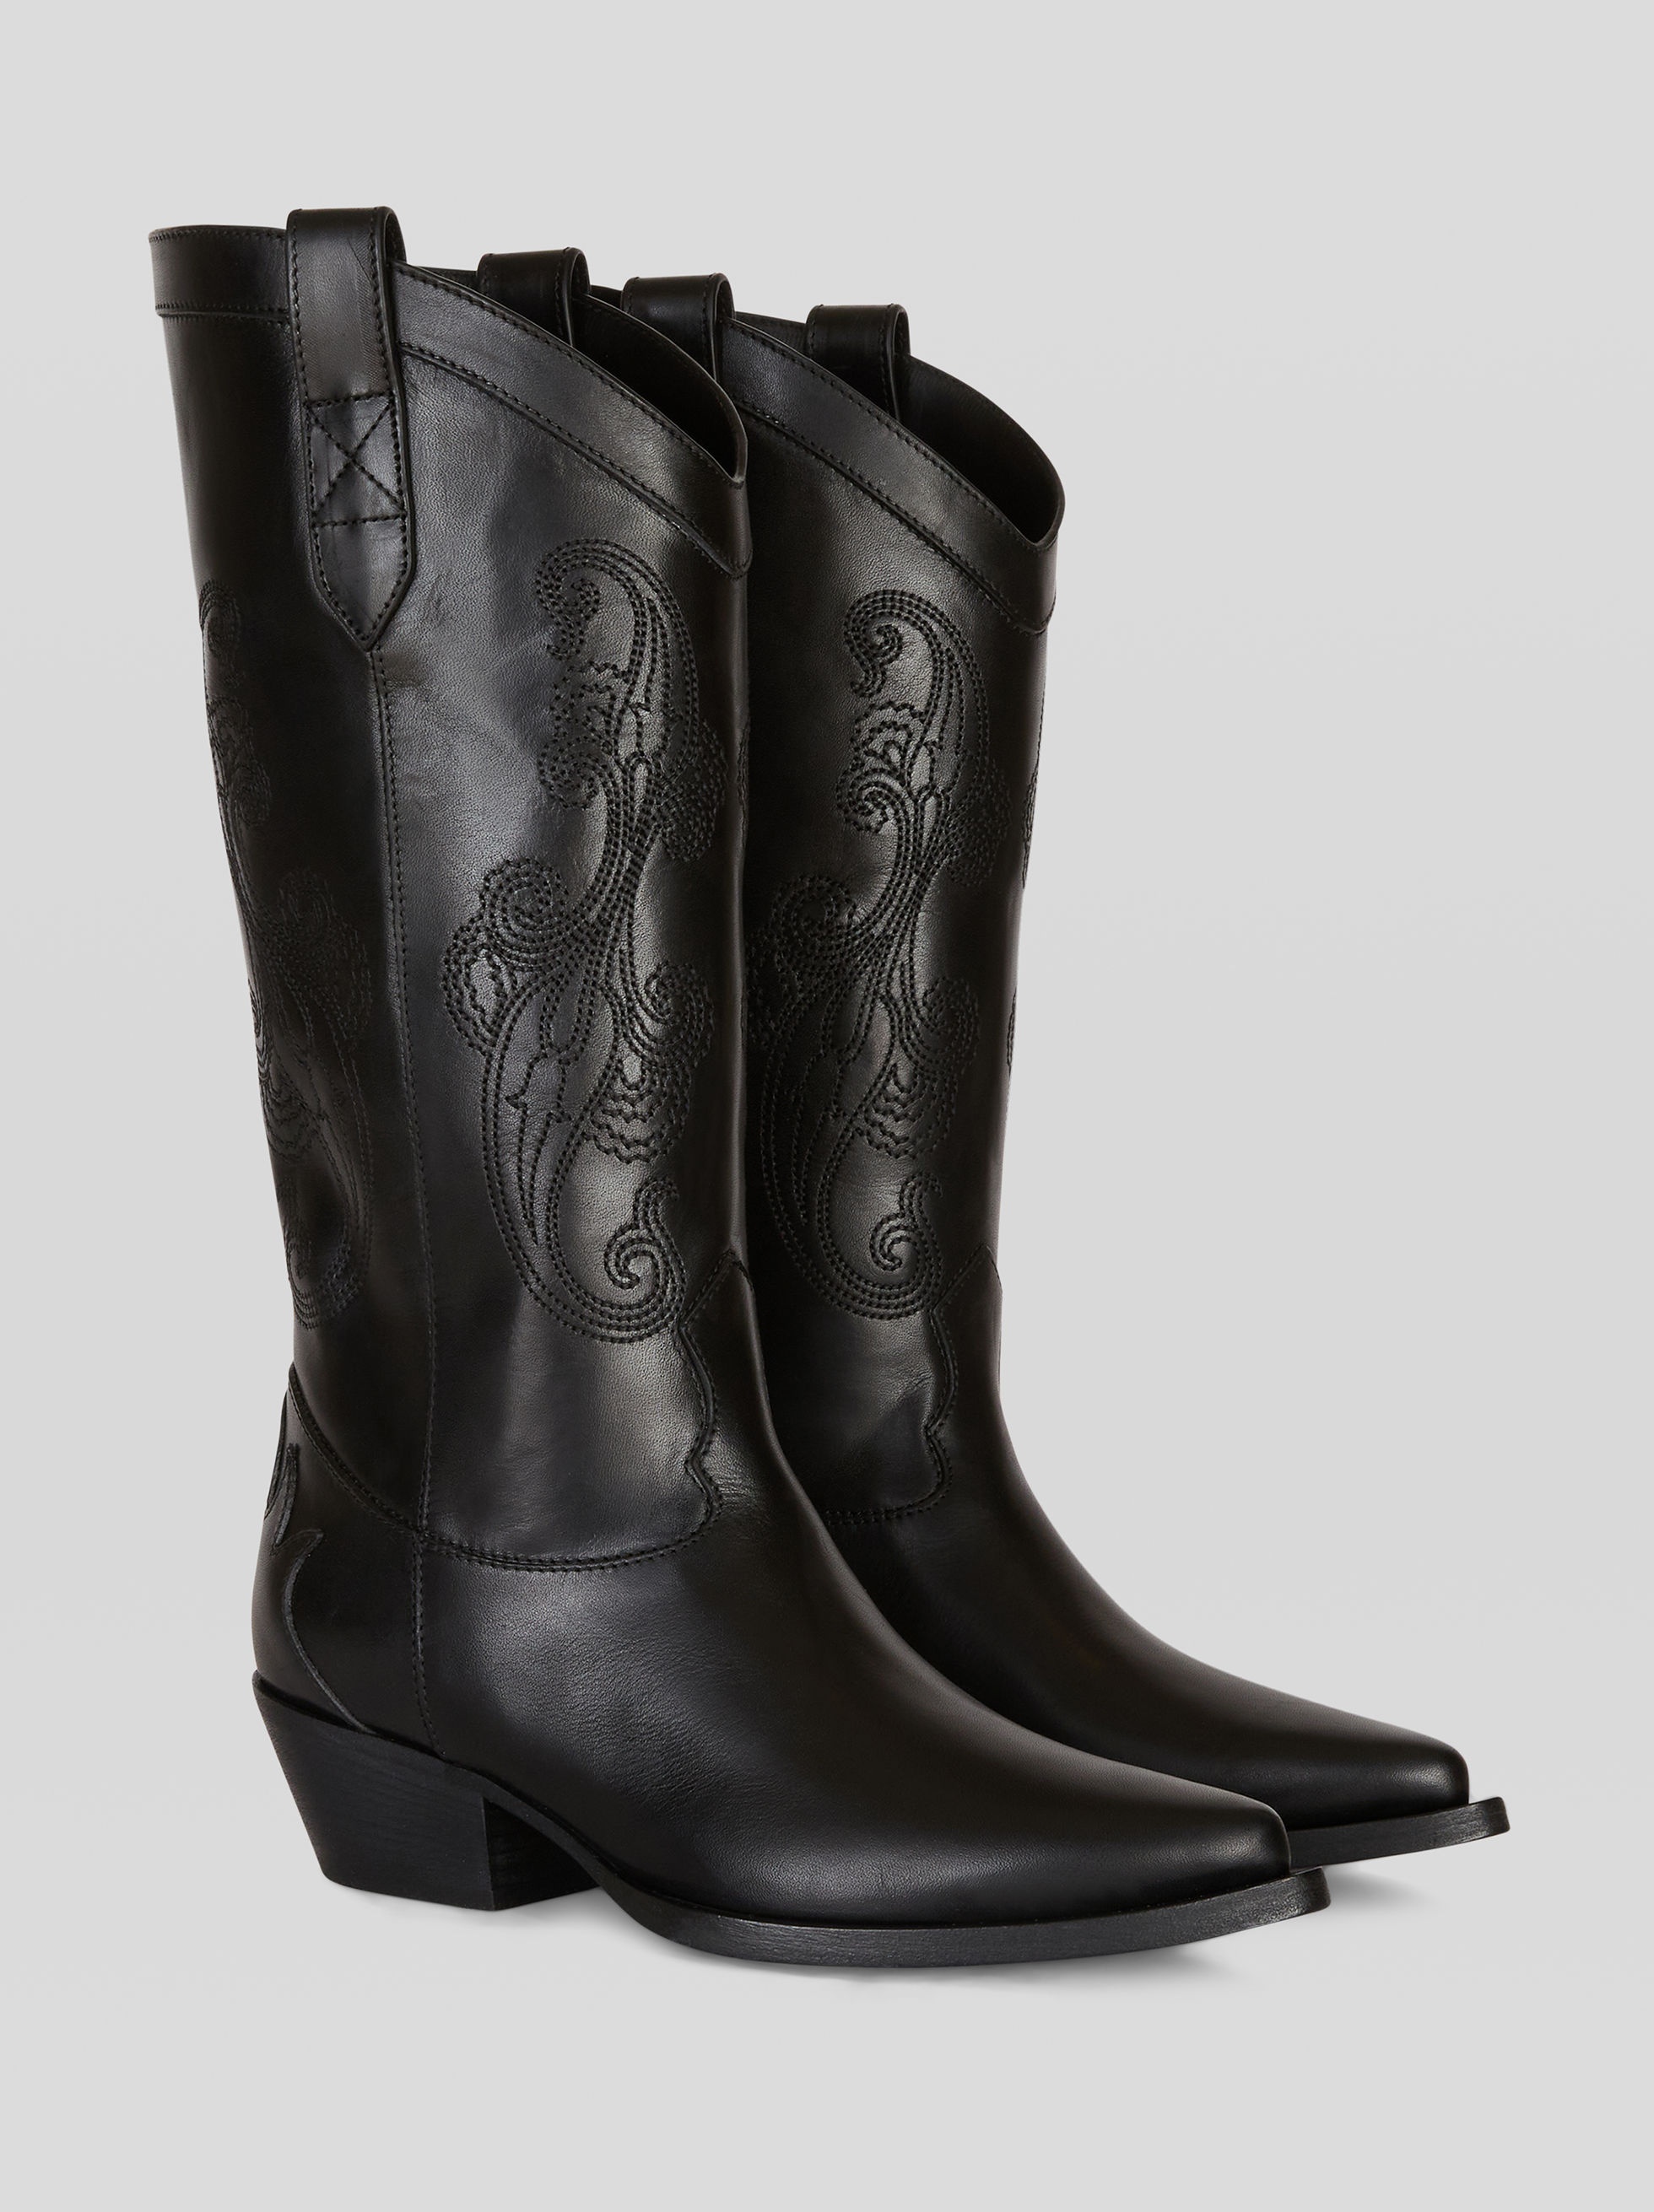 LEATHER BOOTS WITH PAISLEY EMBROIDERY - 3